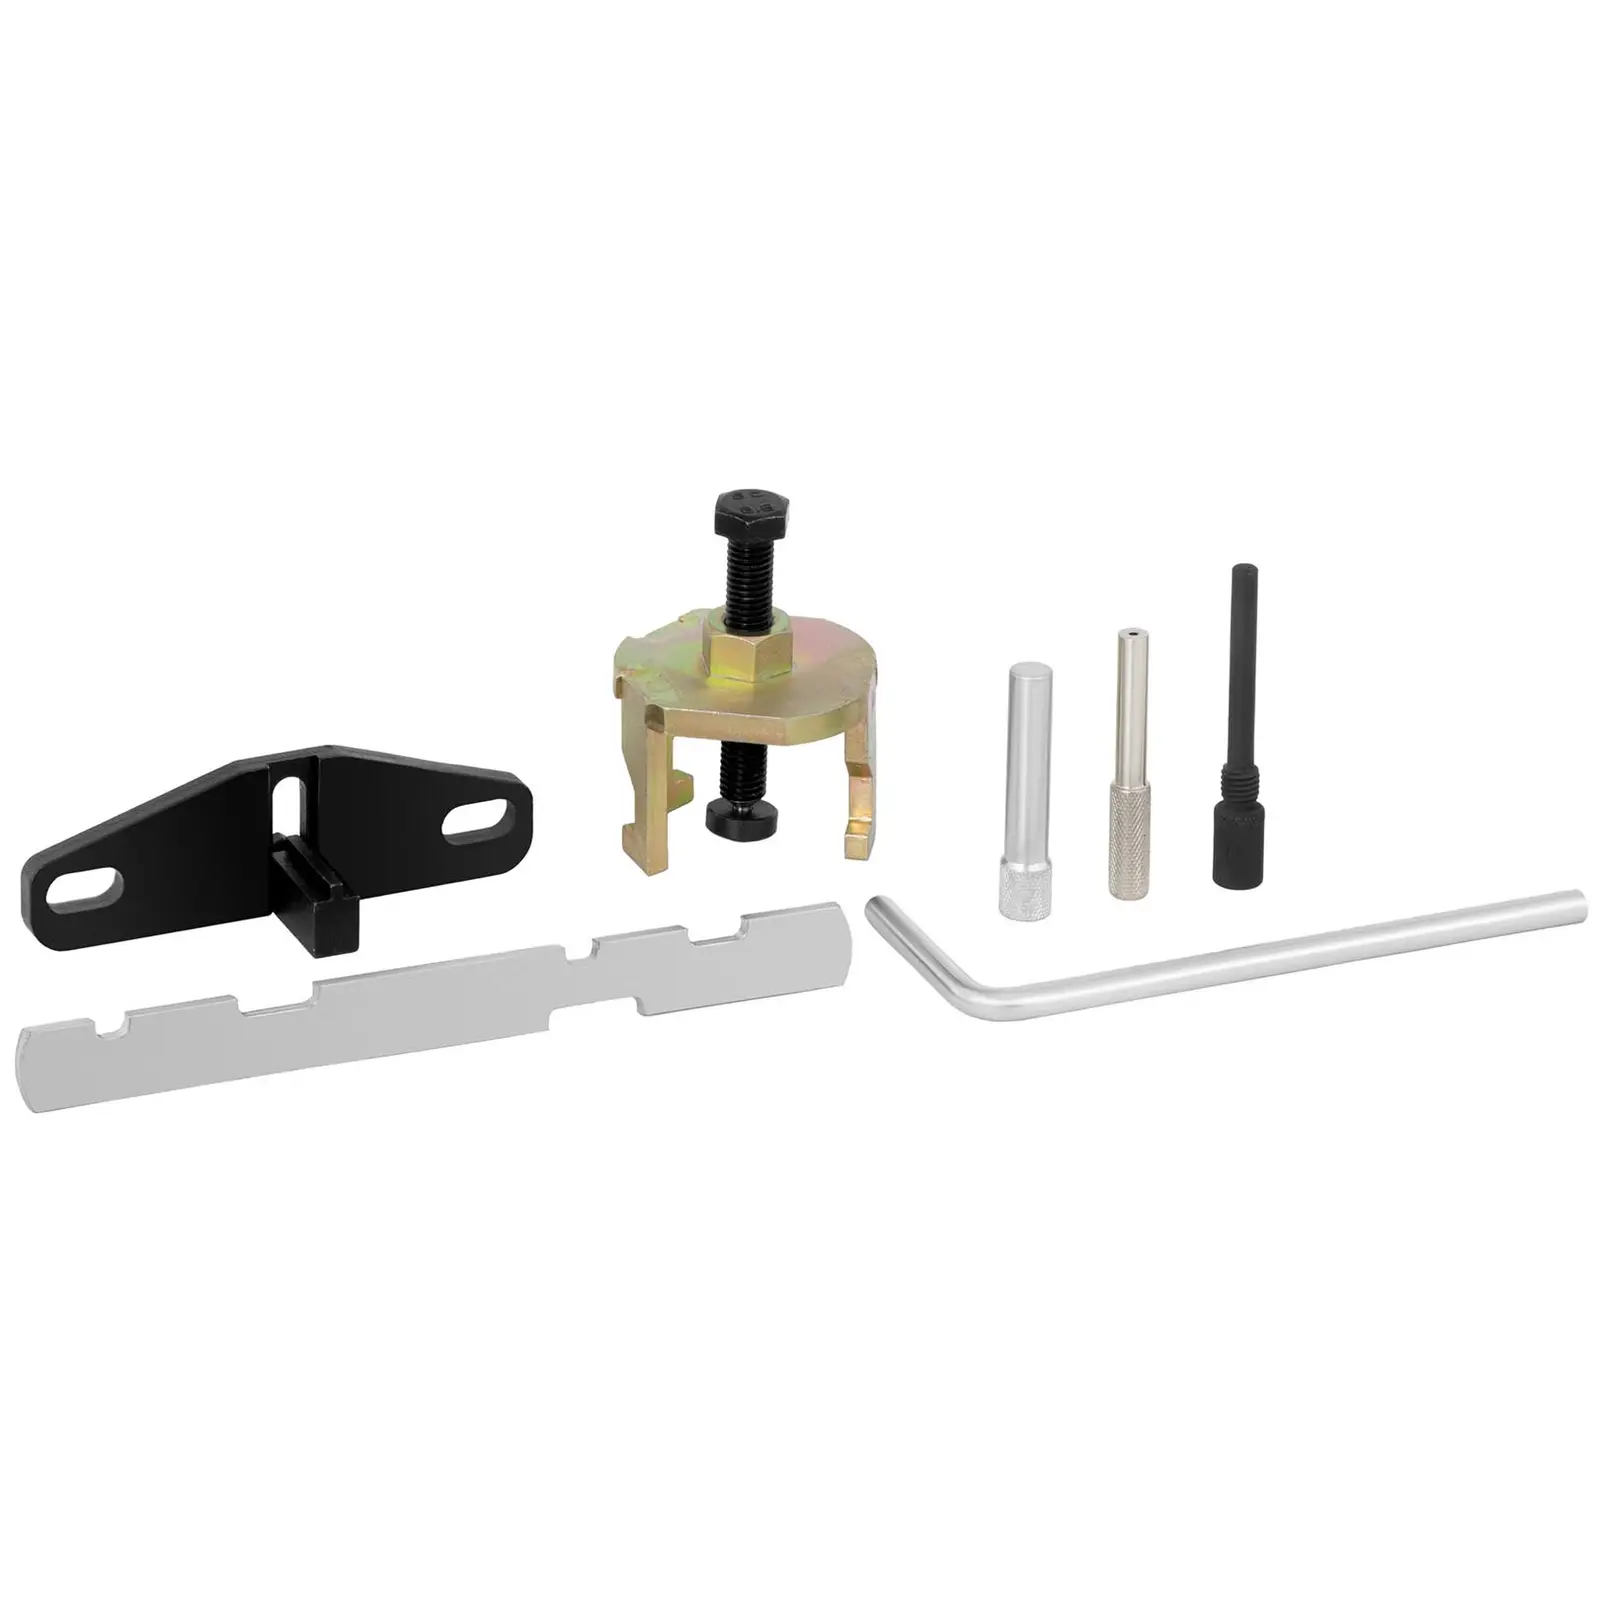 Camshaft Locking Tool - compatible with Ford - Mazda